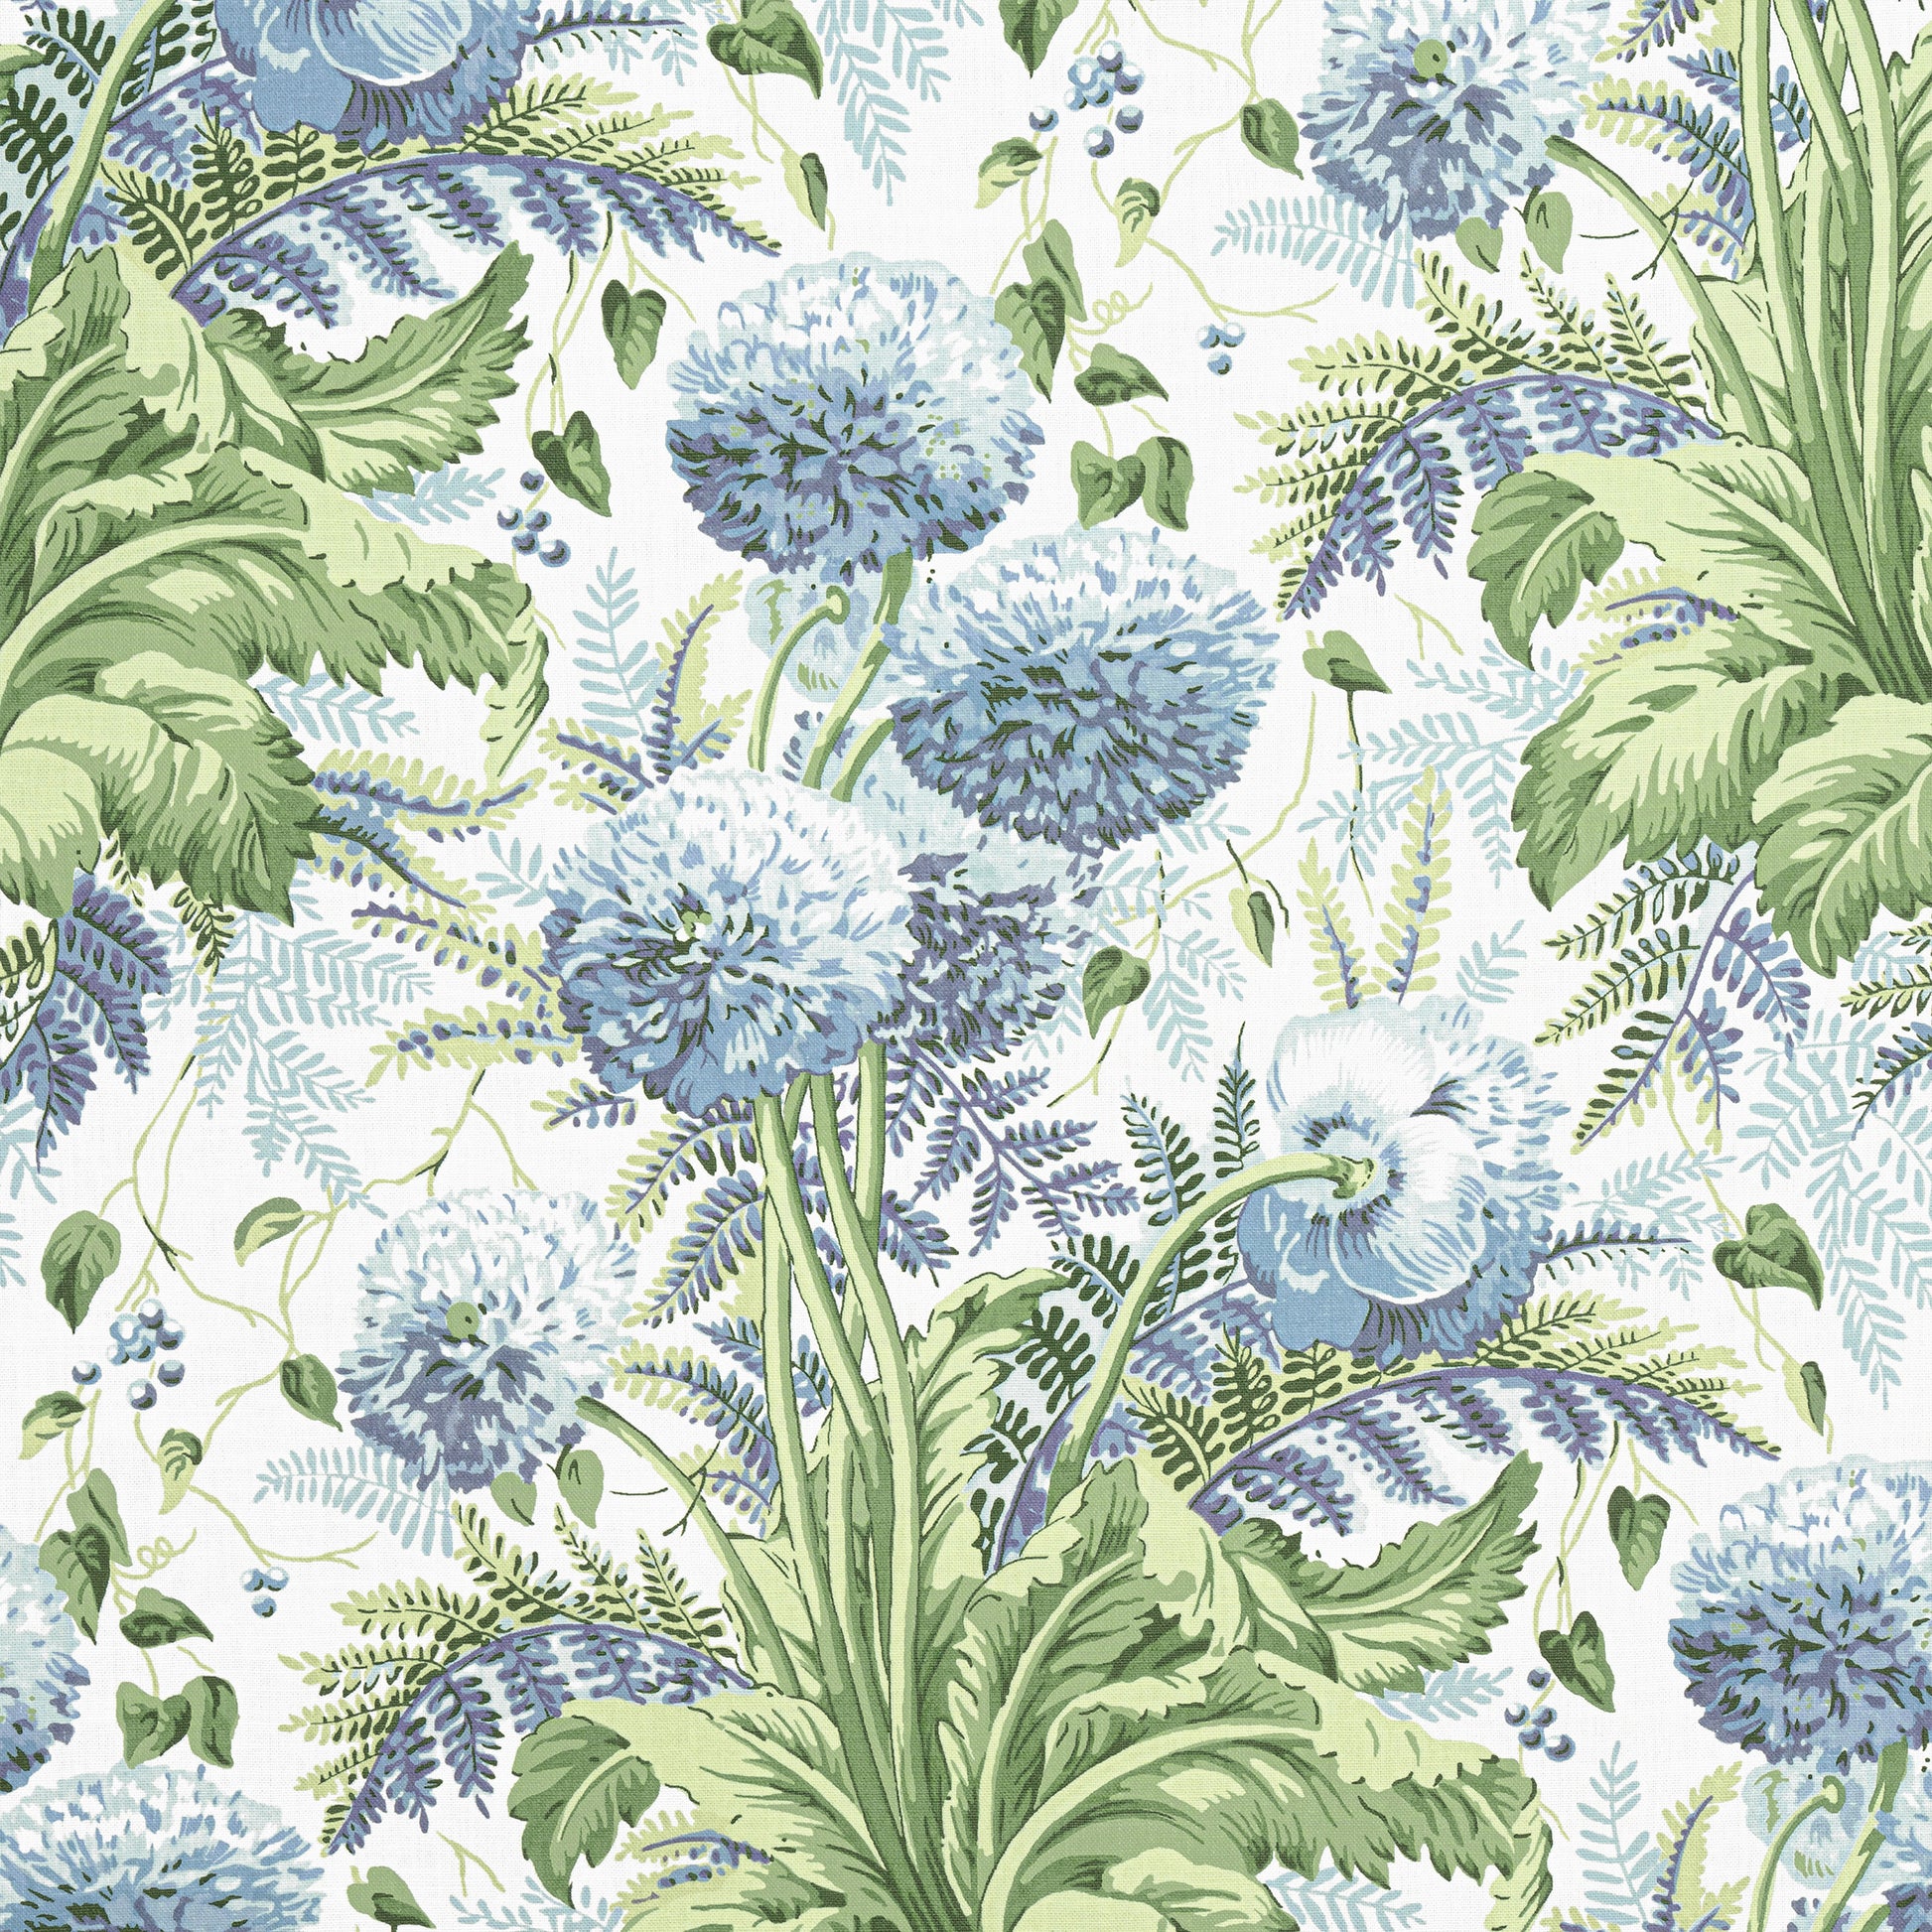 Purchase  Ann French Fabric Product# AF24535  pattern name  Dahlia